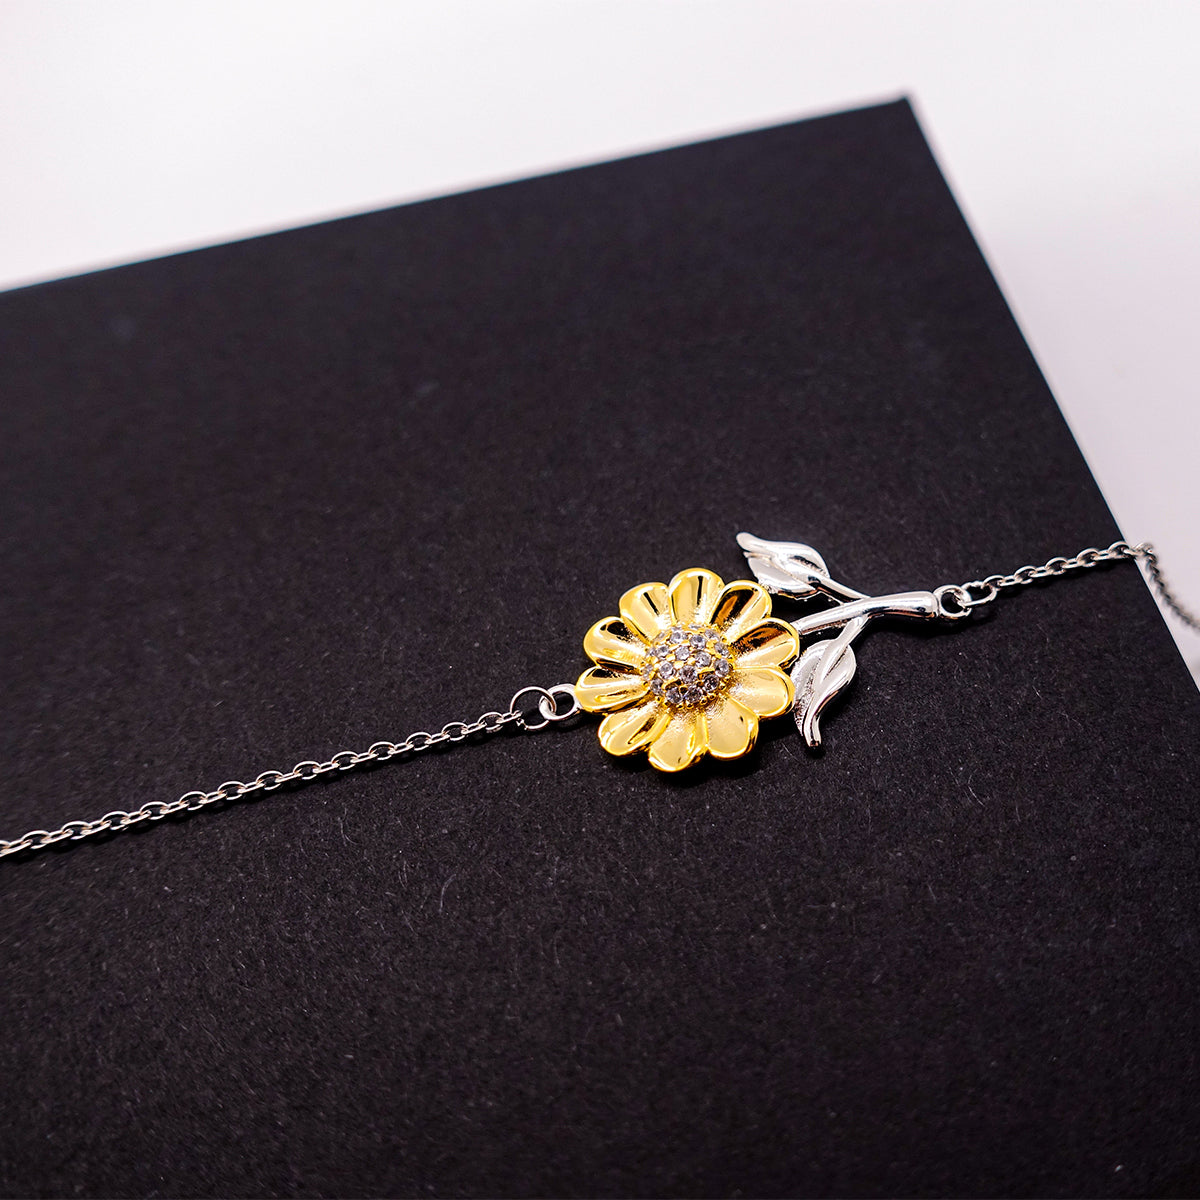 Sunflower Bracelet Mimi Youll Always Have a Special Place in My Heart Engraved Inspirational Gift for Her Birthday Holidays Veterans Day Jewelry